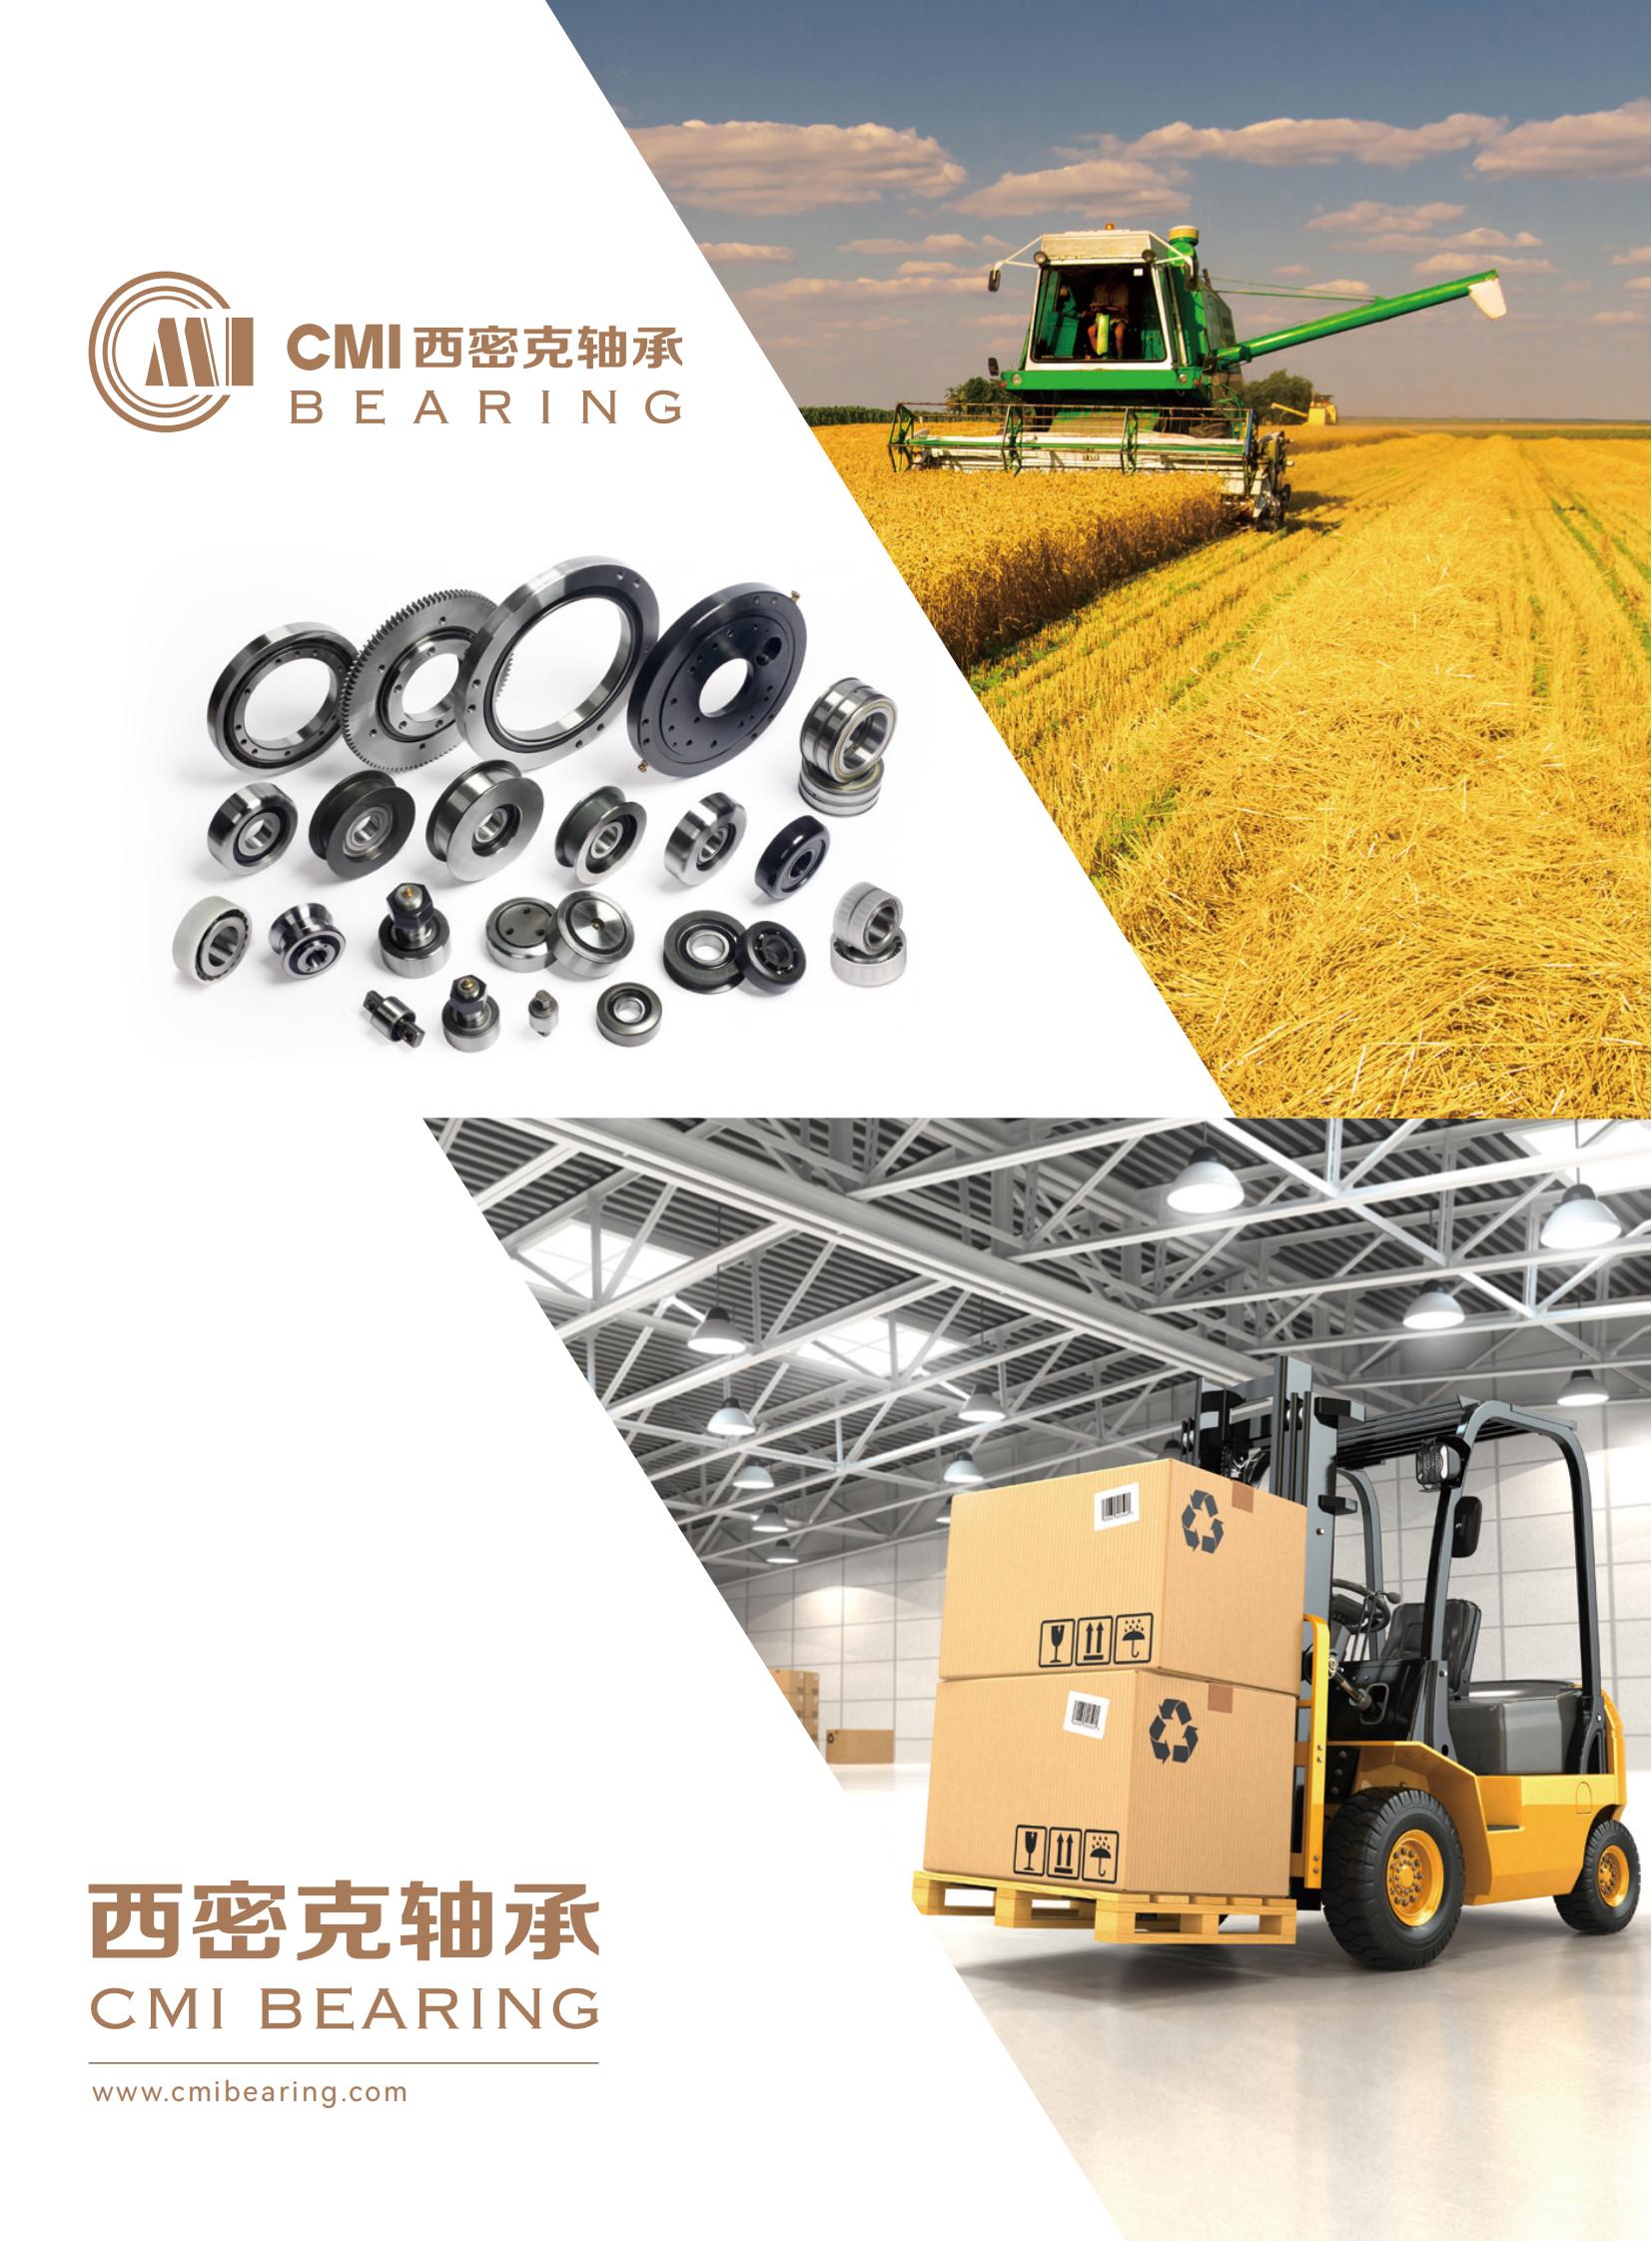 CMI focusing on high quality beaning solutions for agricultural industry